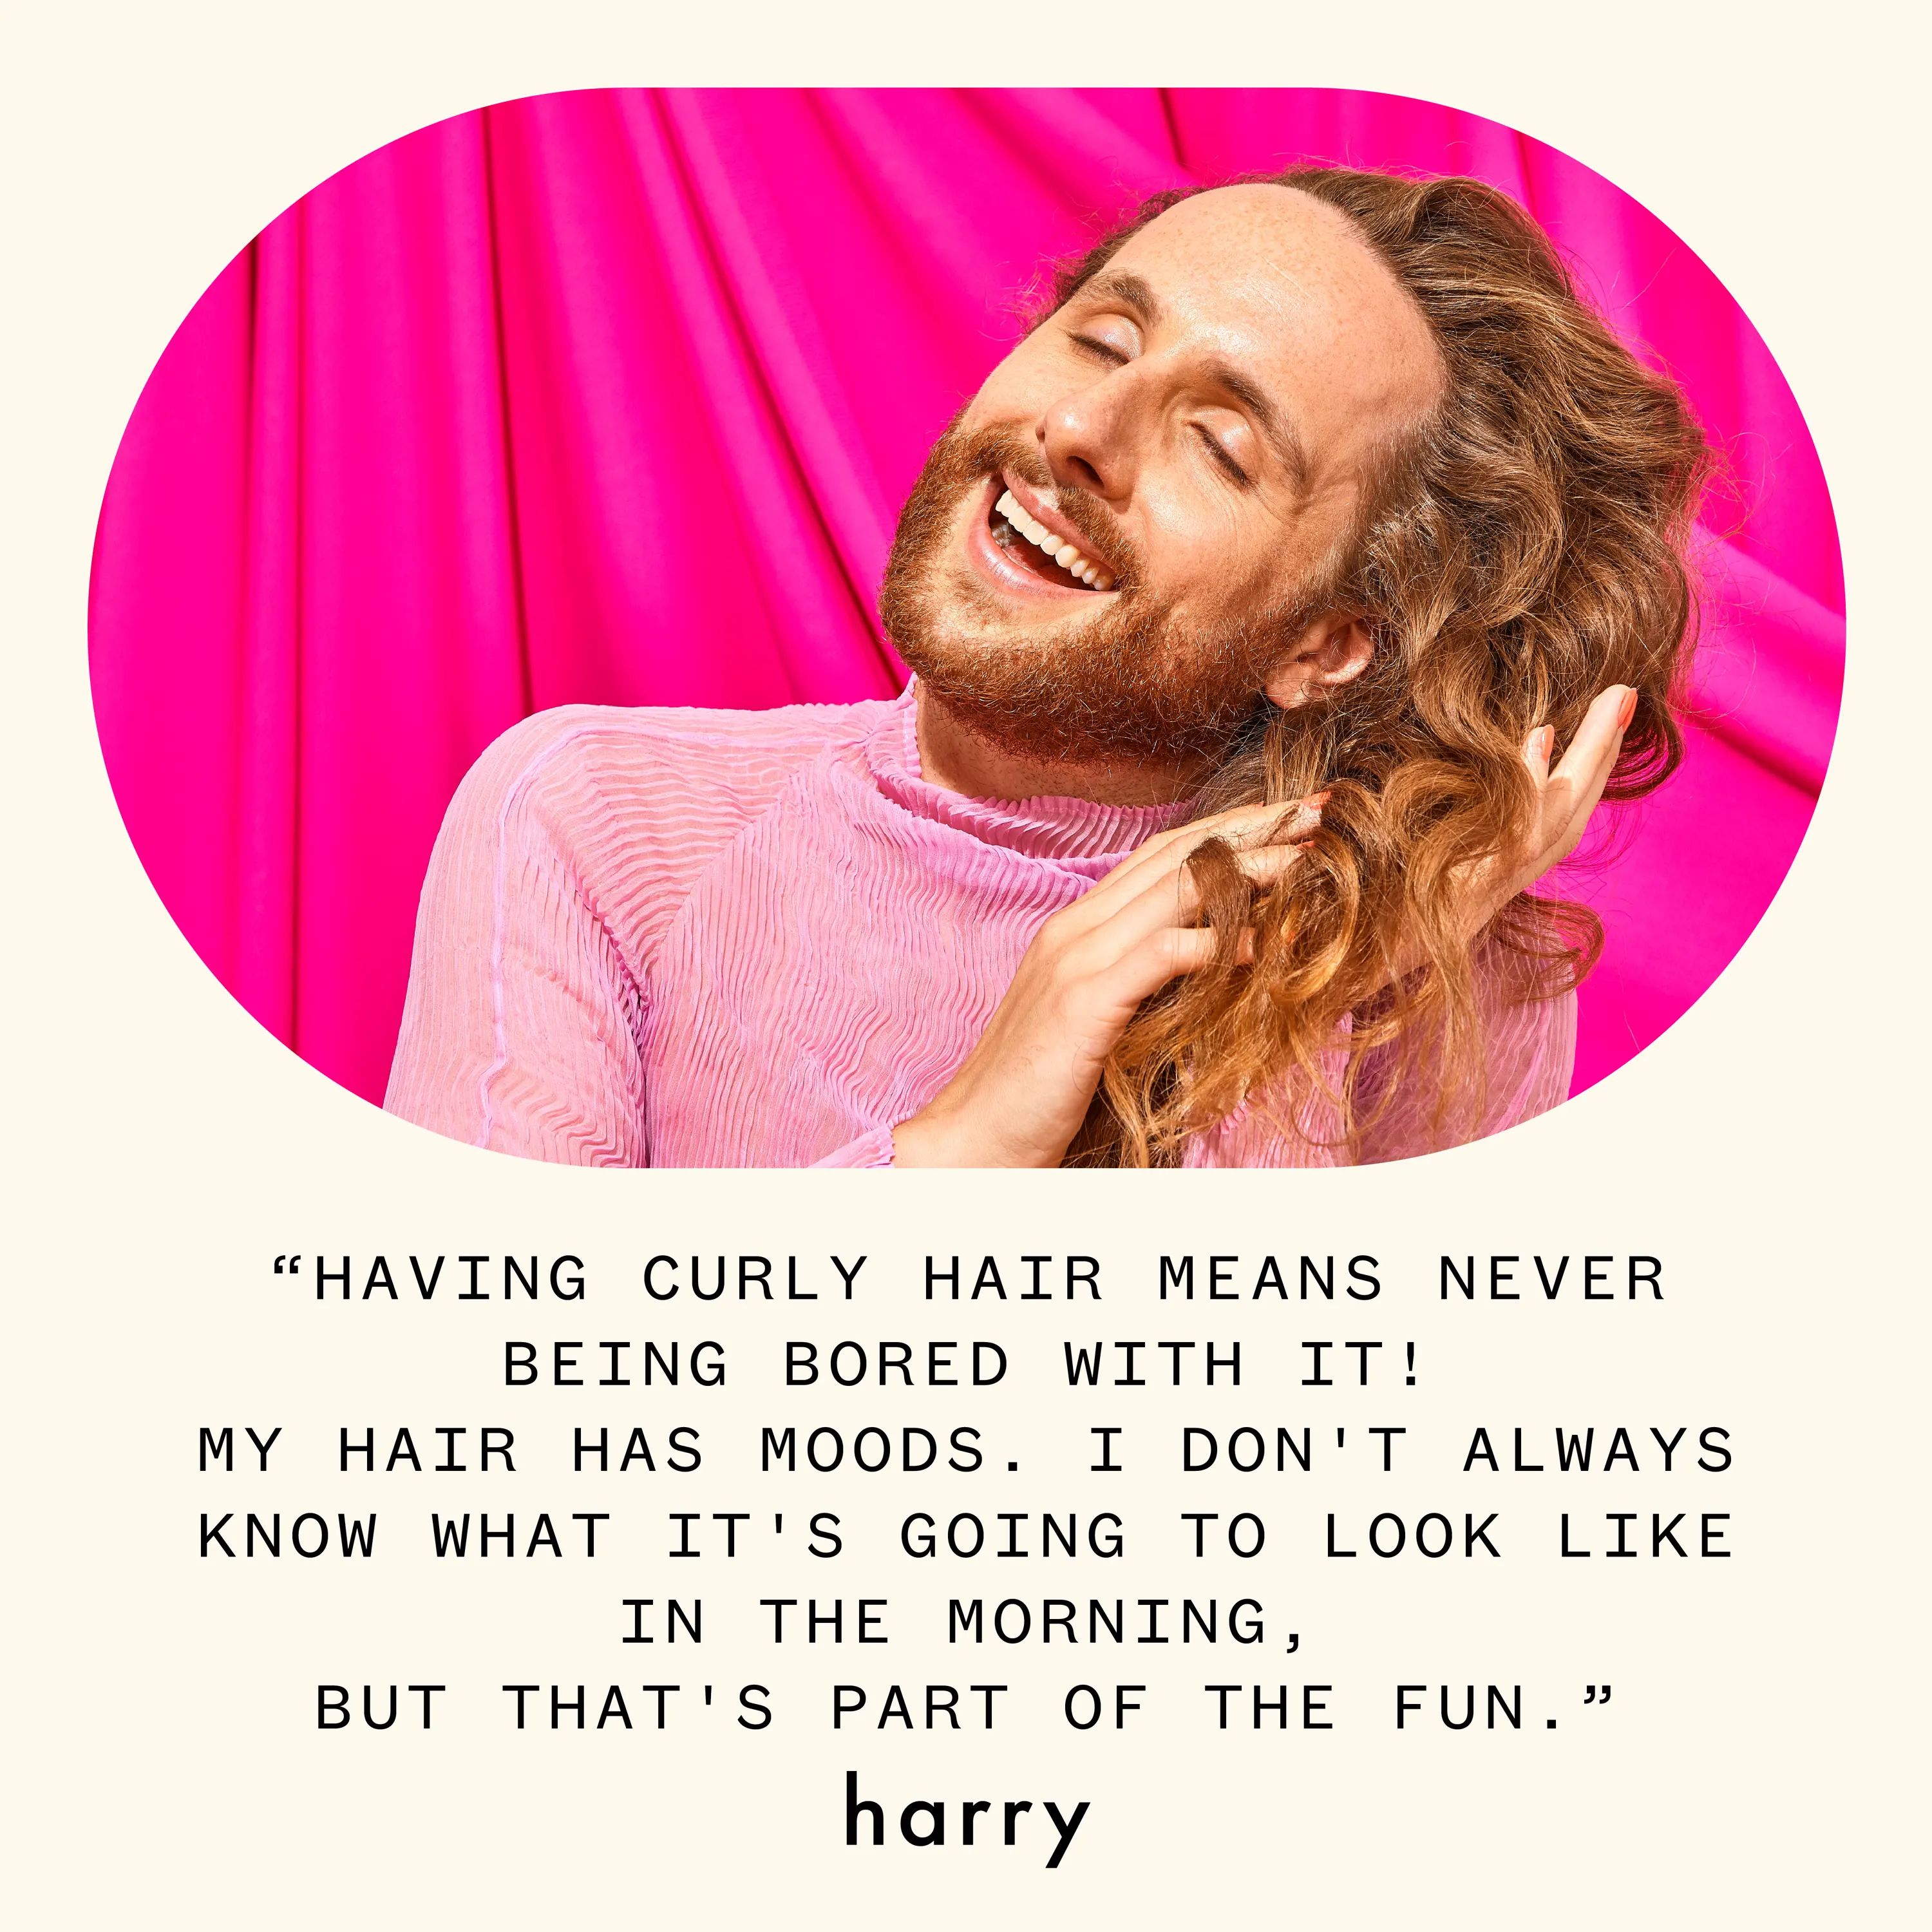 harry's hair diary quote